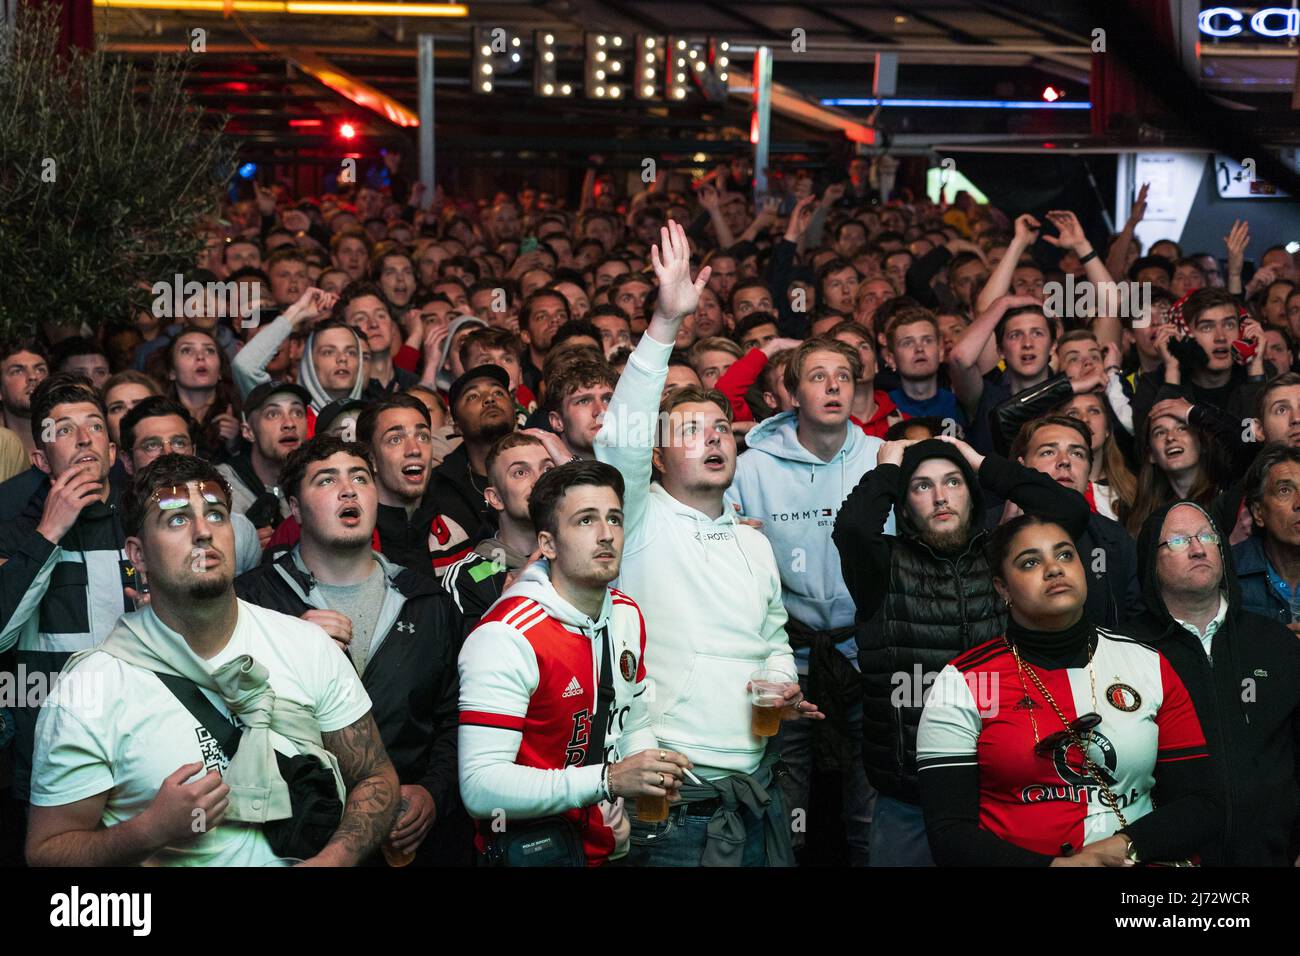 2022-05-05 21:42:49 ROTTERDAM - Feyenoord supporters on Stadhuisplein watch  the UEFA Conference League semifinal match between Olympique de Marseille  and Feyenoord on screens. ANP JEROEN JUMELET netherlands out - belgium out  Stock Photo - Alamy